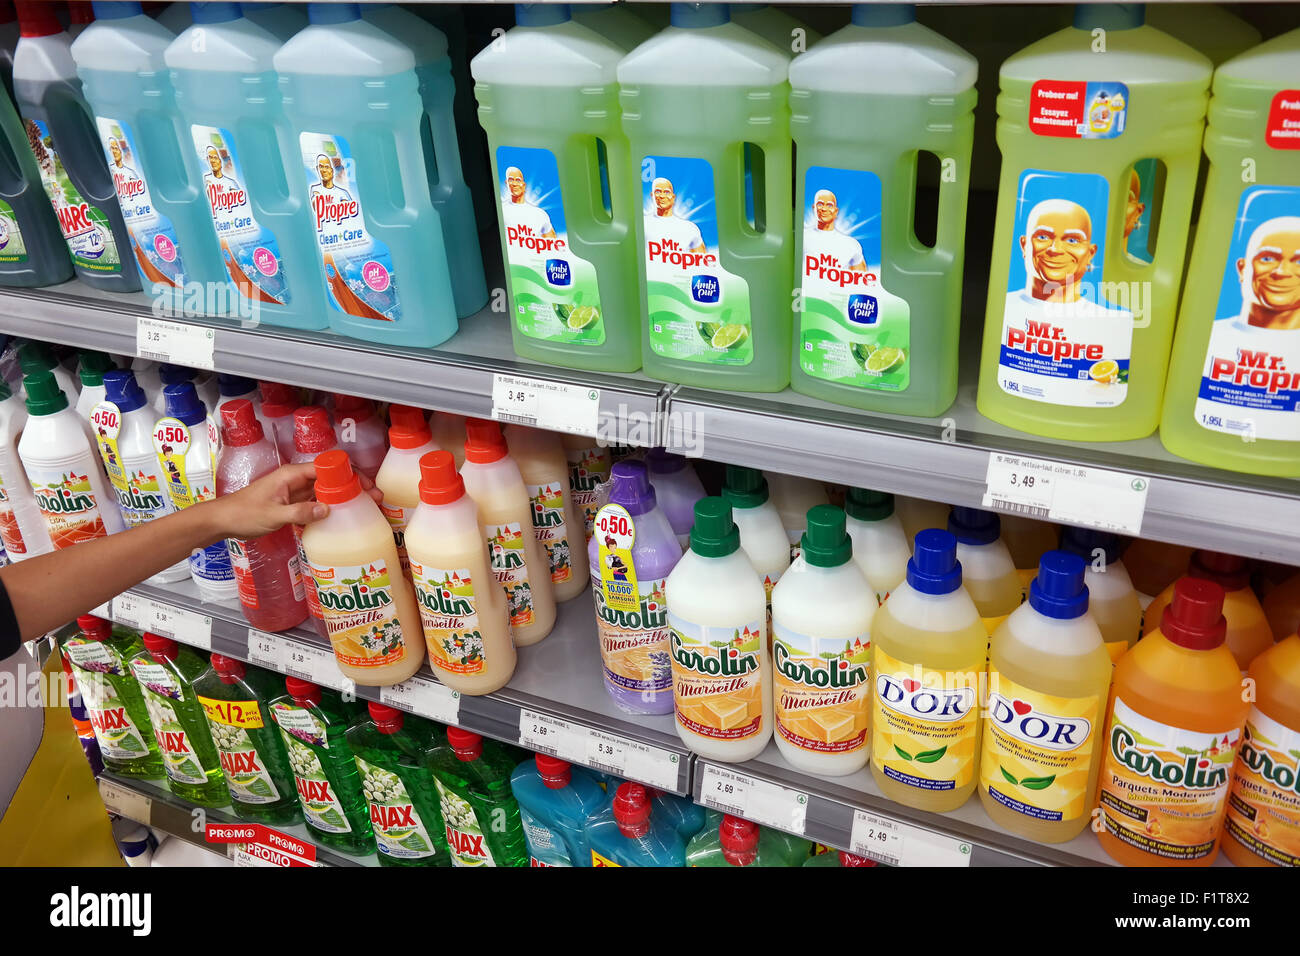 Shelves filled with variety of Bottles liquid All-purpose cleaner in a SPAR Supermarket in Belgium Stock Photo